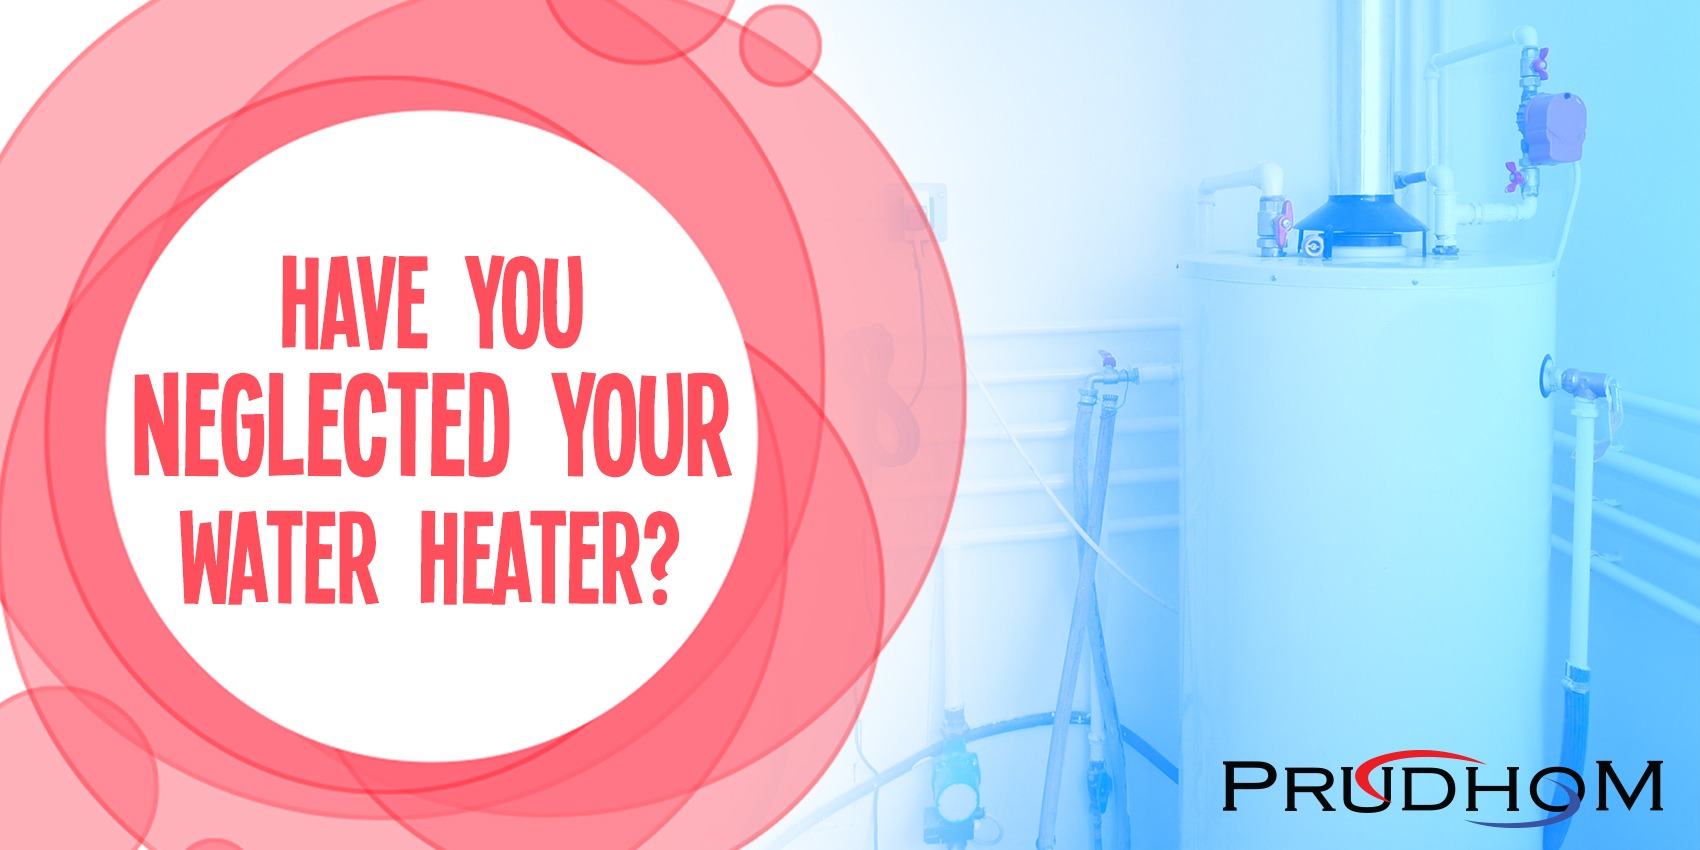 Have You Neglected Your Water Heater in Edmond, OK?